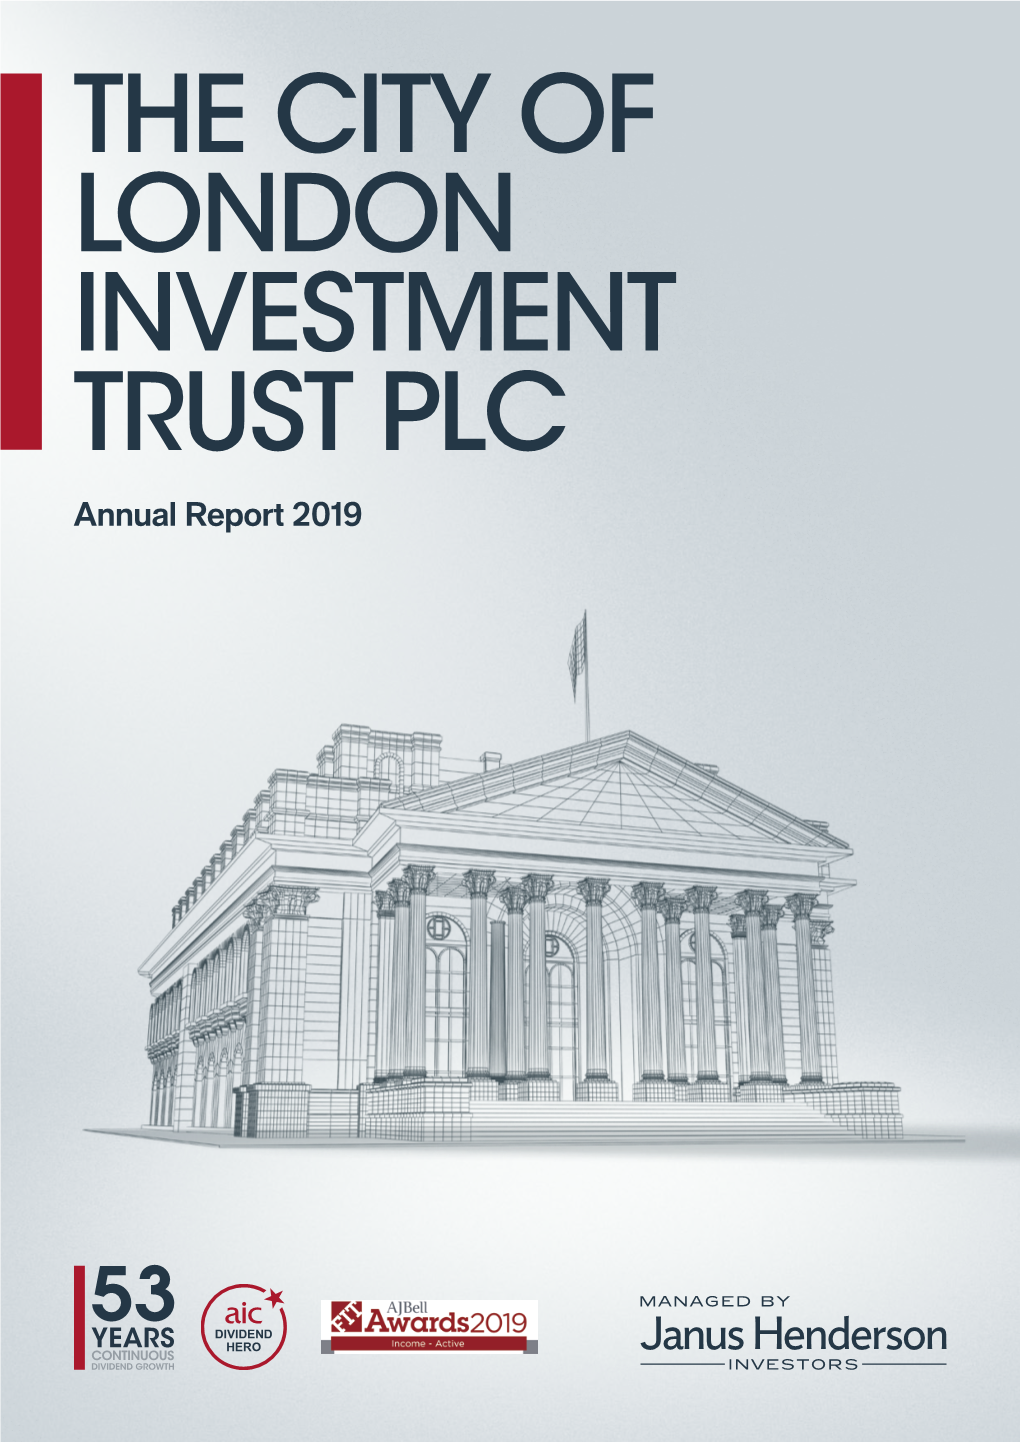 The City of London Investment Trust